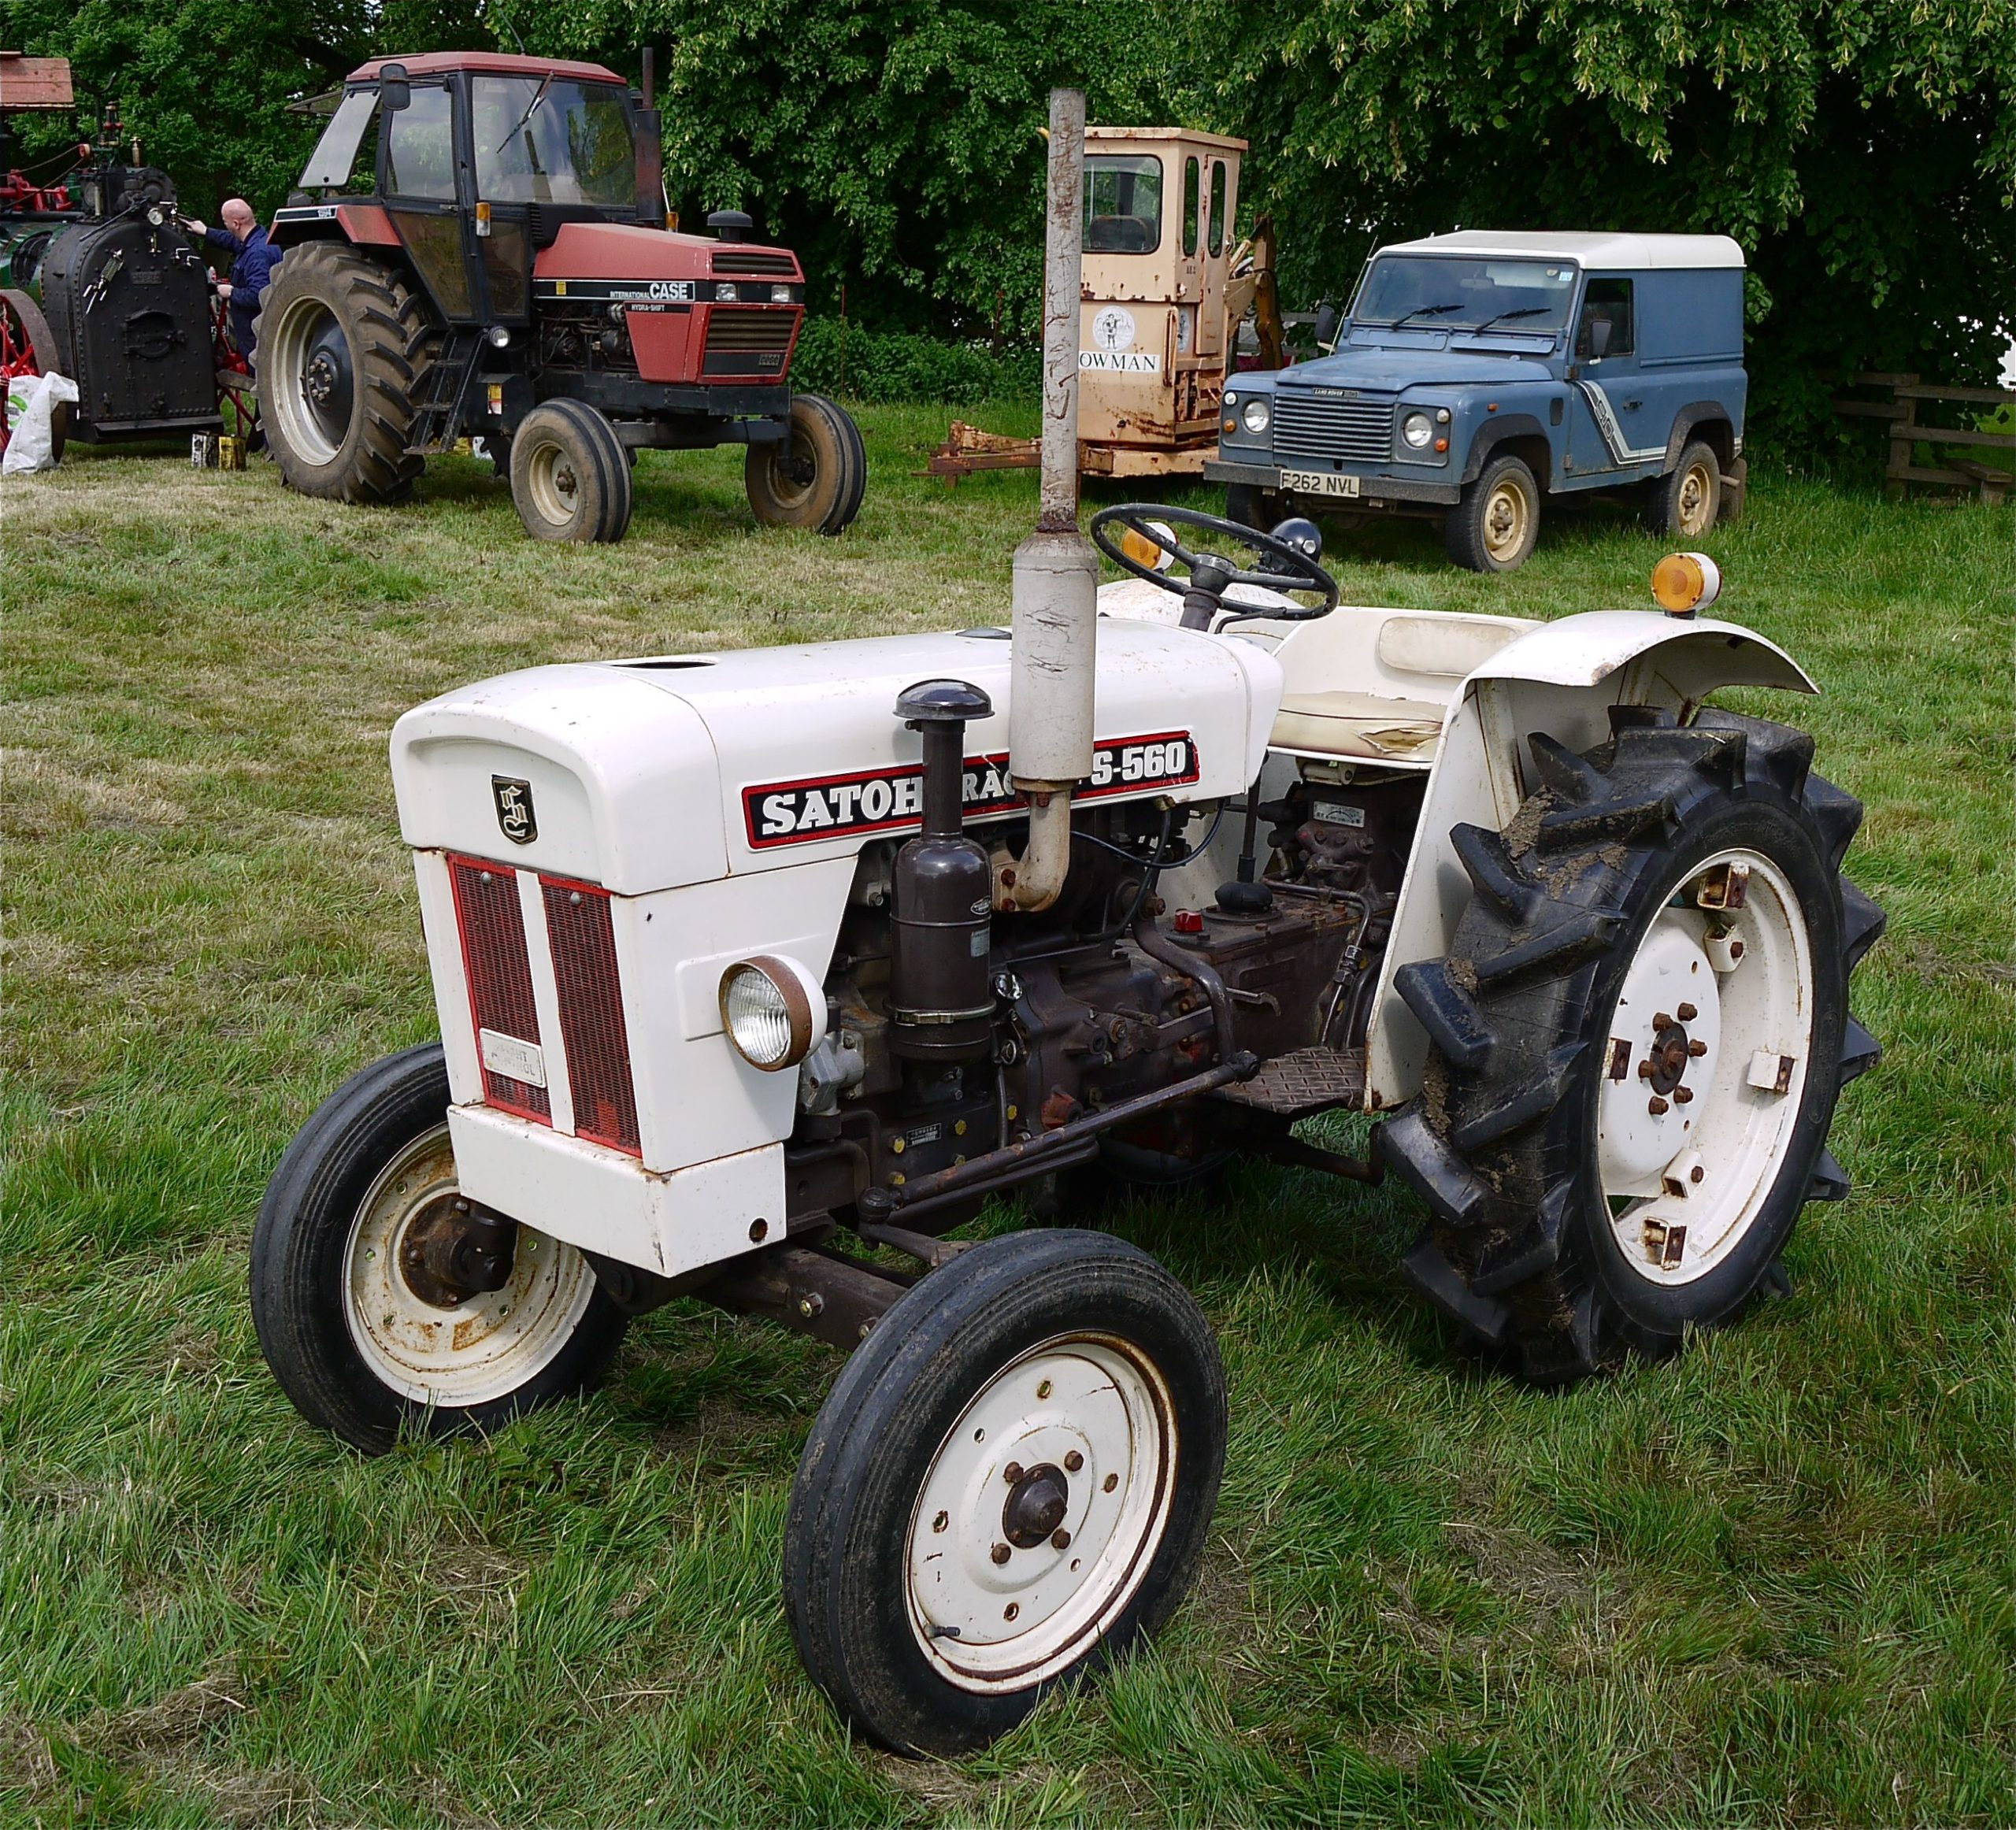 Satoh Tractor Problems: Common Issues and How to Fix Them